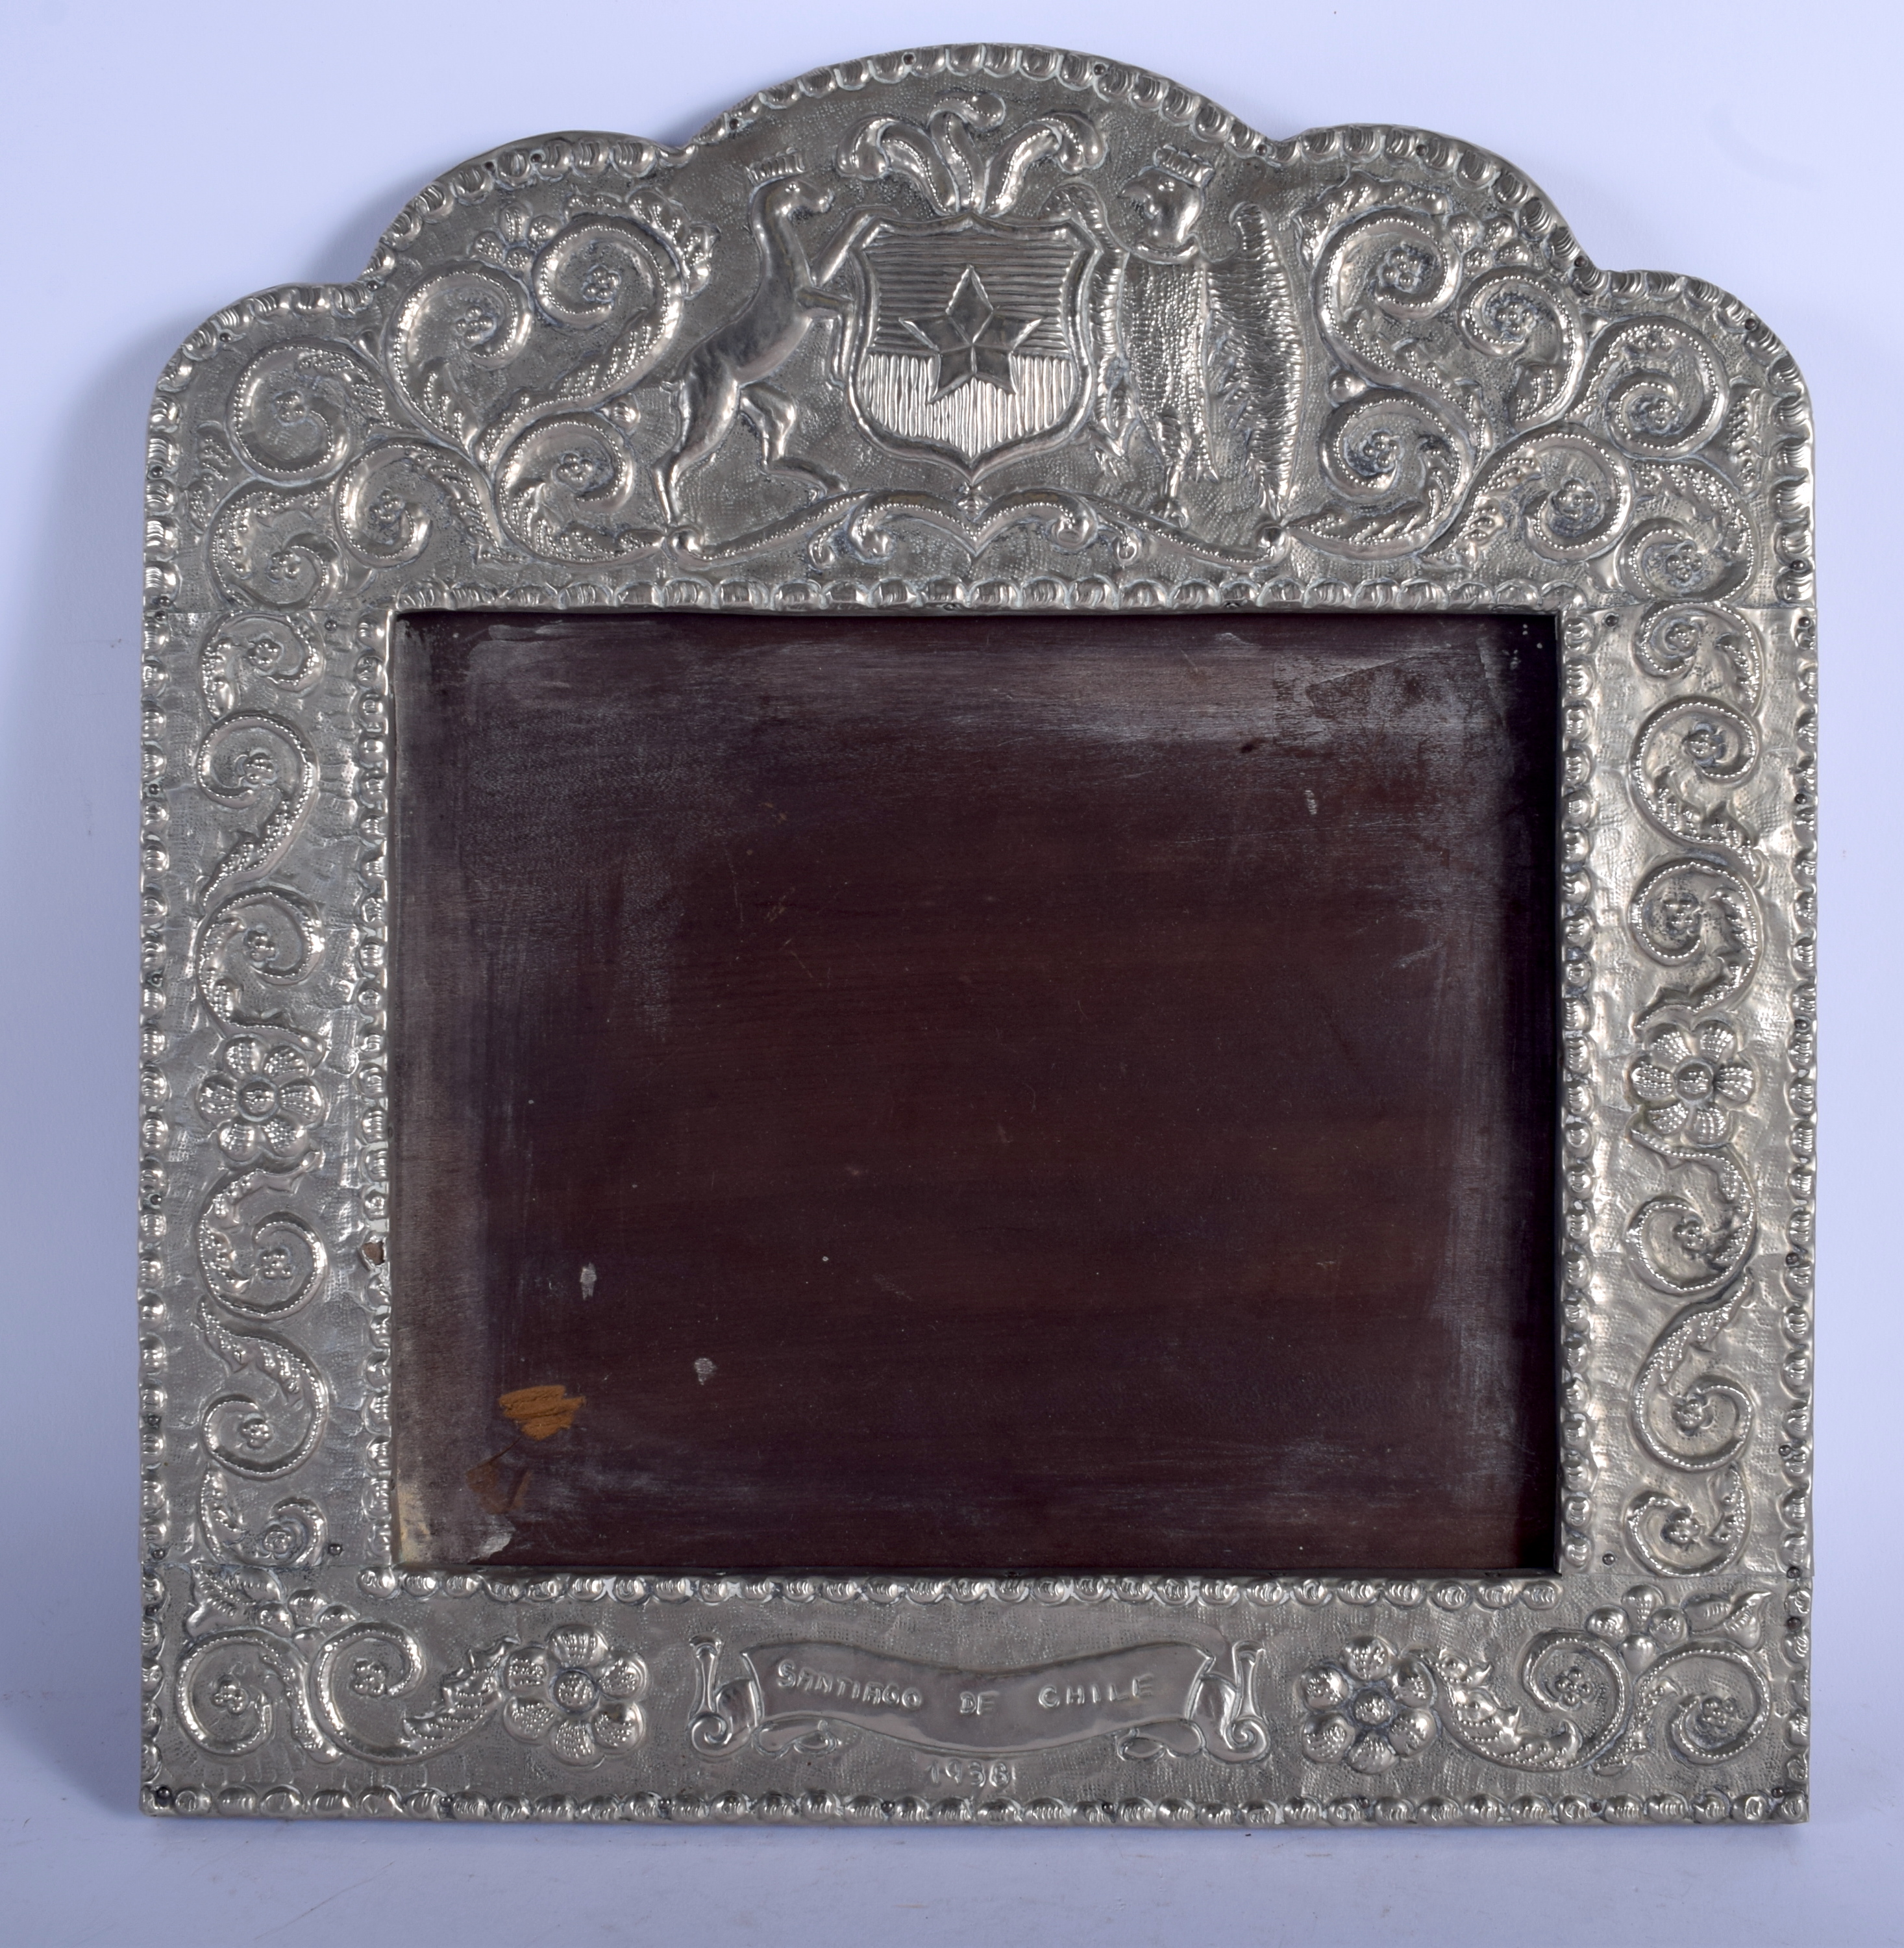 AN EARLY 20TH CENTURY SOUTH AMERICAN SANTIAGO CHILE WHITE METAL FRAME decorated with foliage. 33 cm